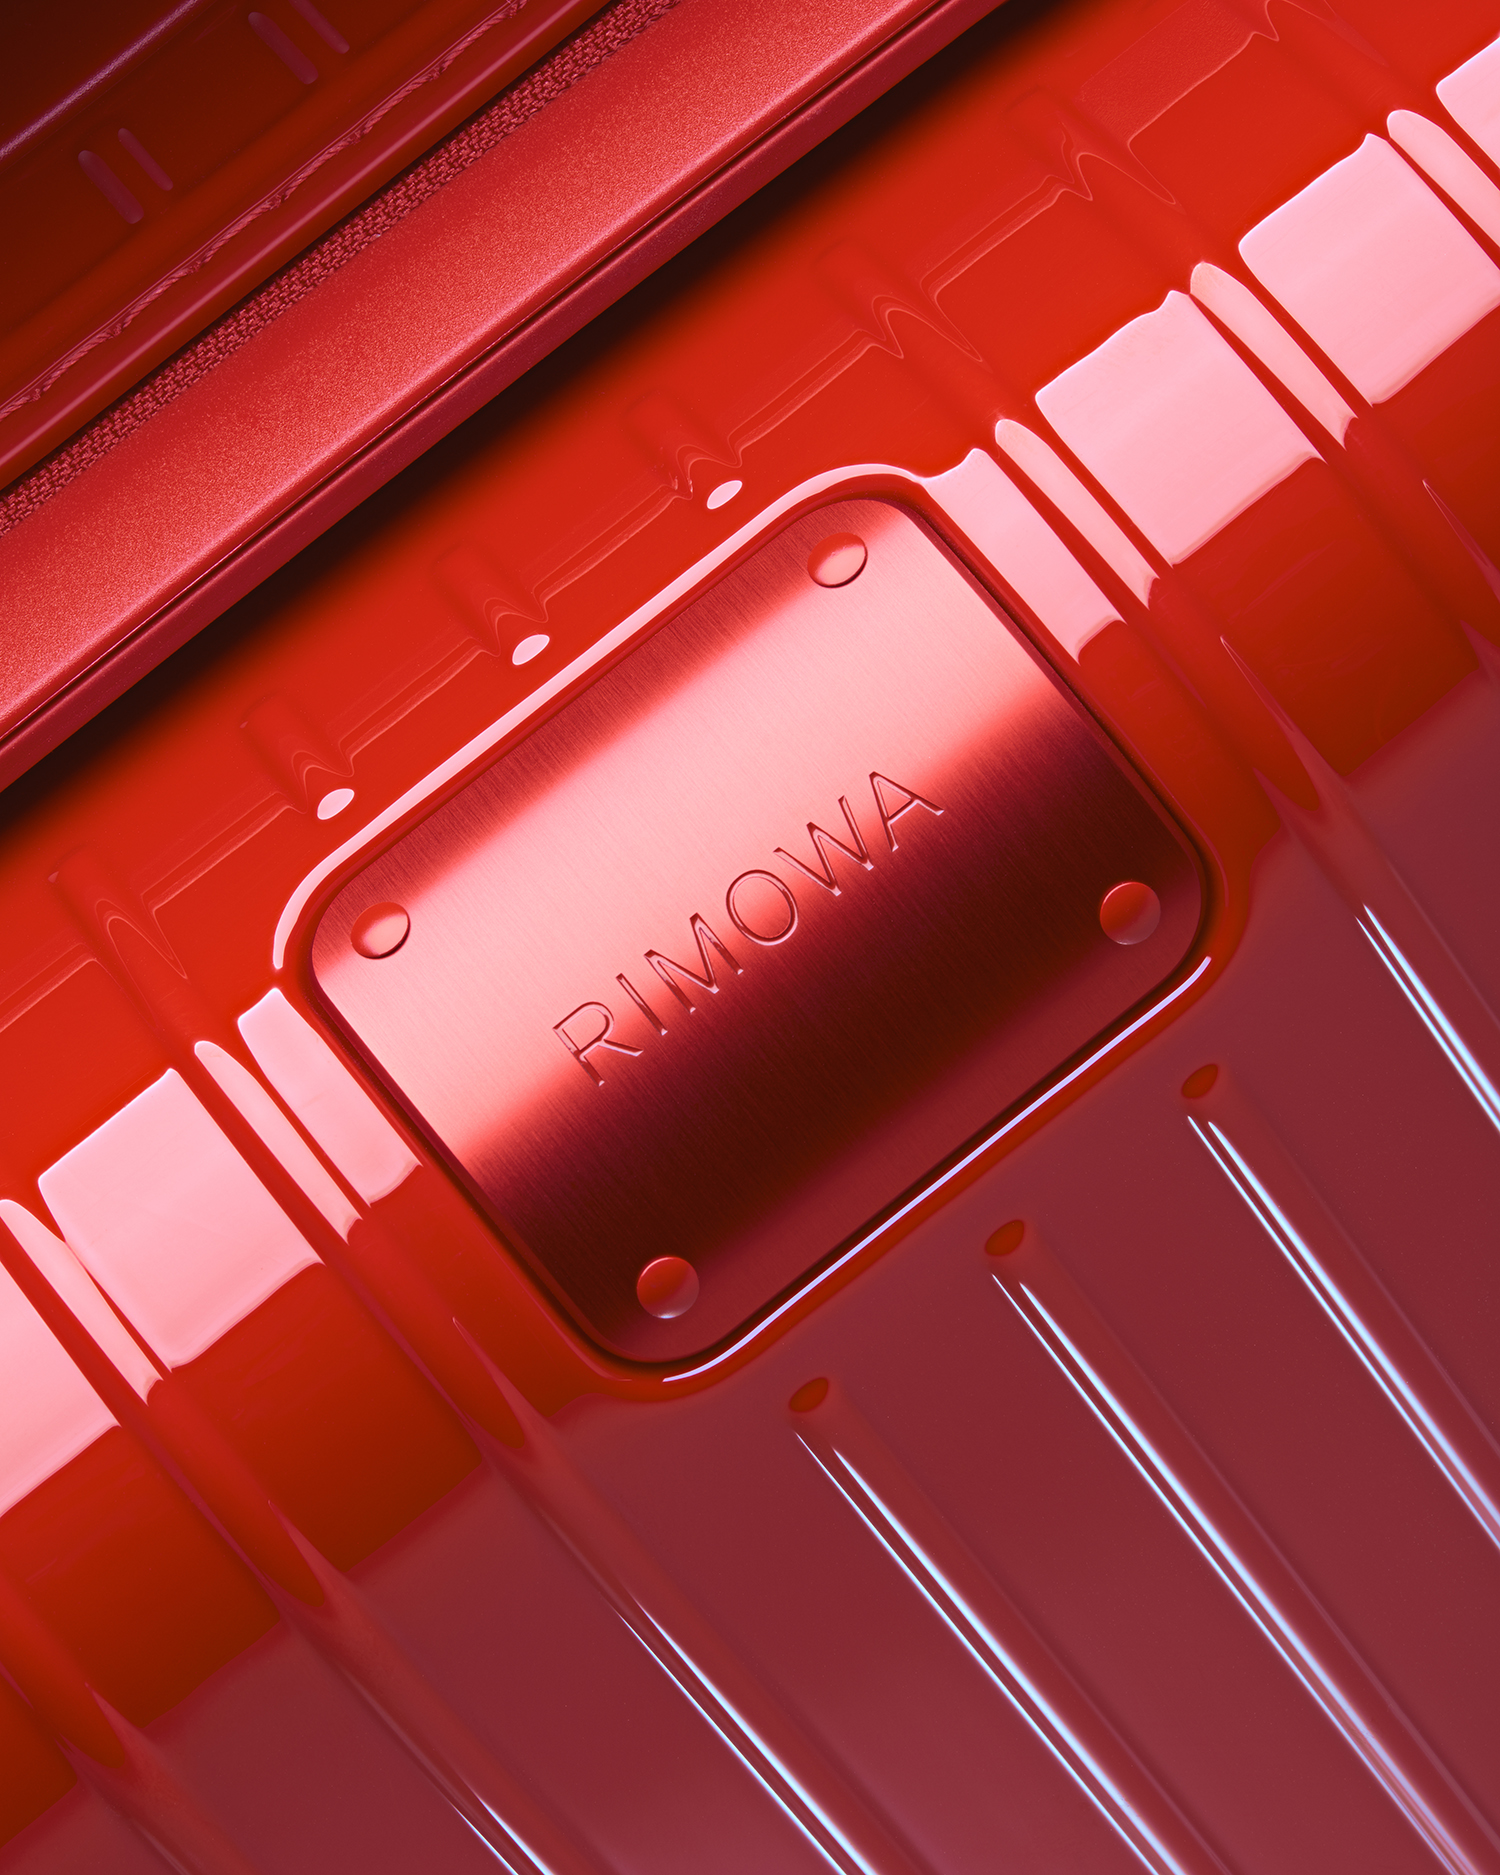 Logotype and art direction by Commission studio for functional luxury luggage manufacturer Rimowa